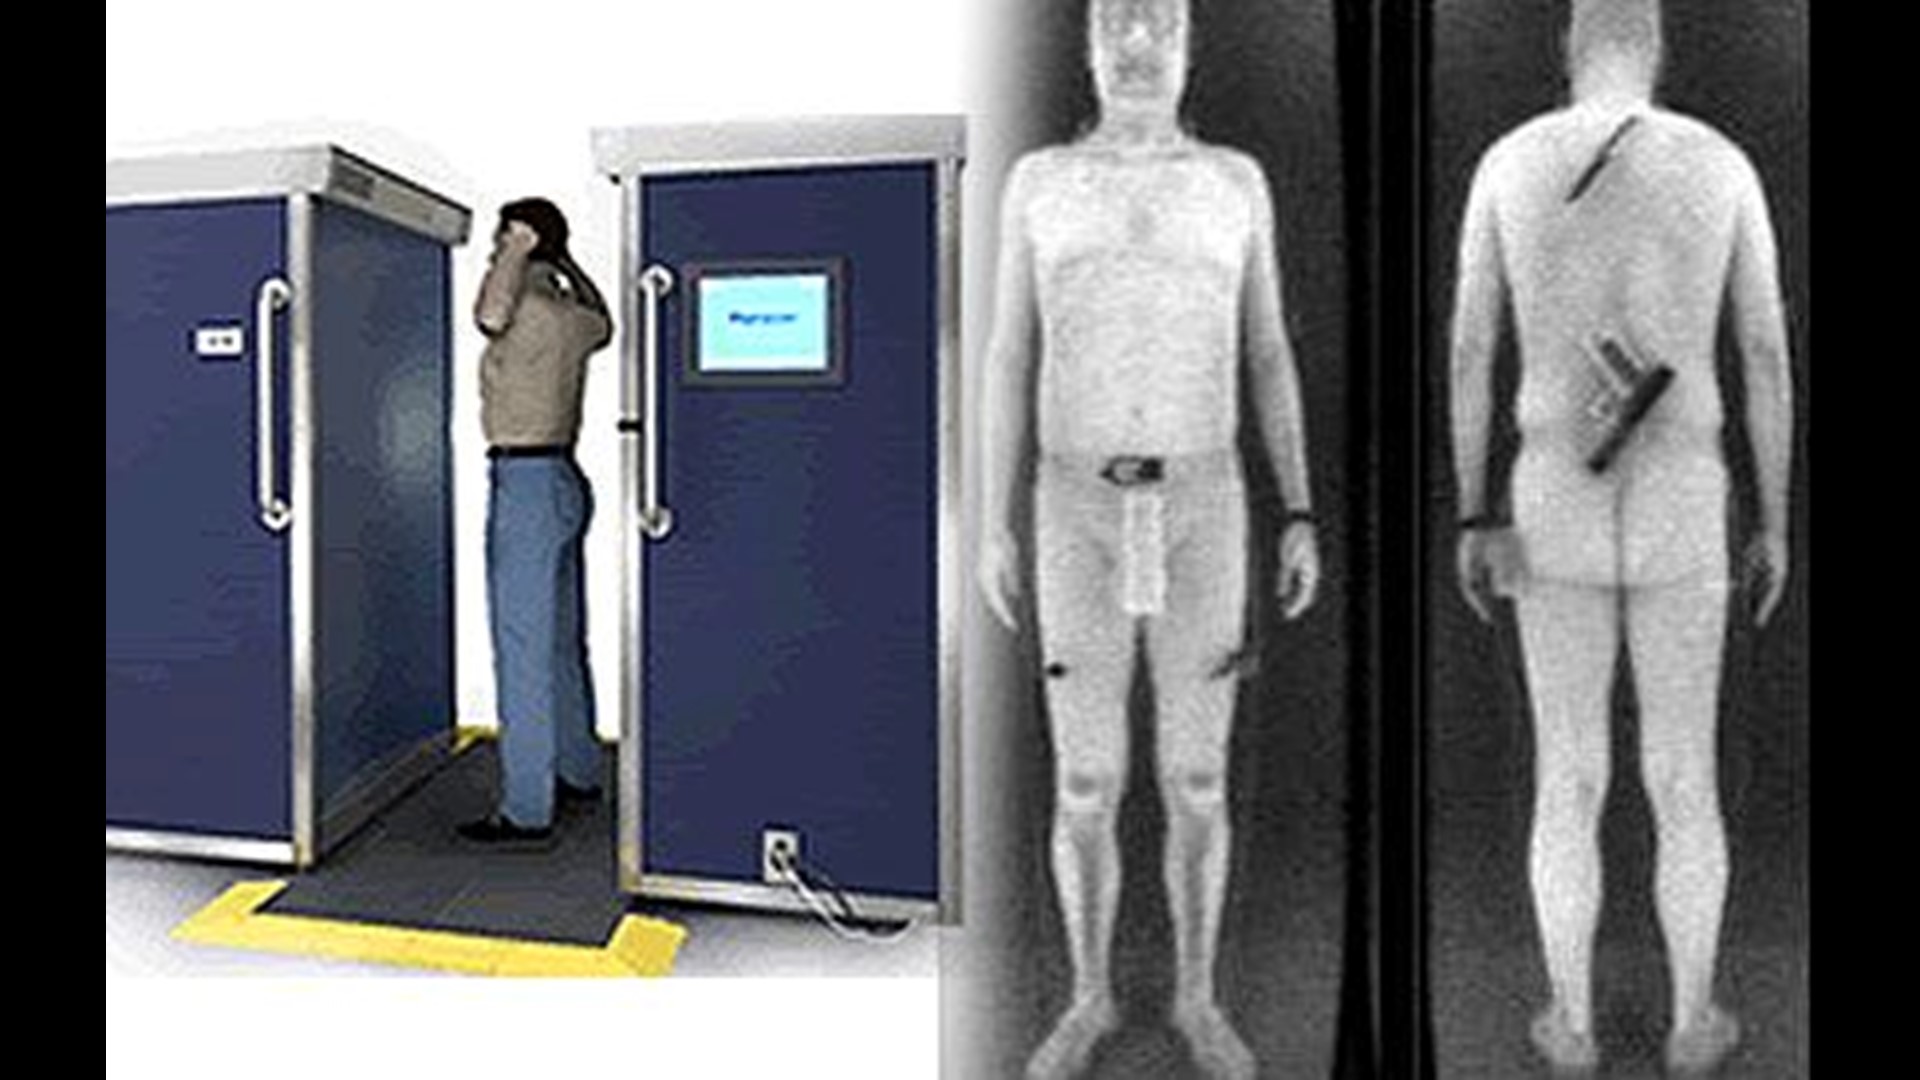 Ap Source New Full Body Scanners For 2 Airports 8833